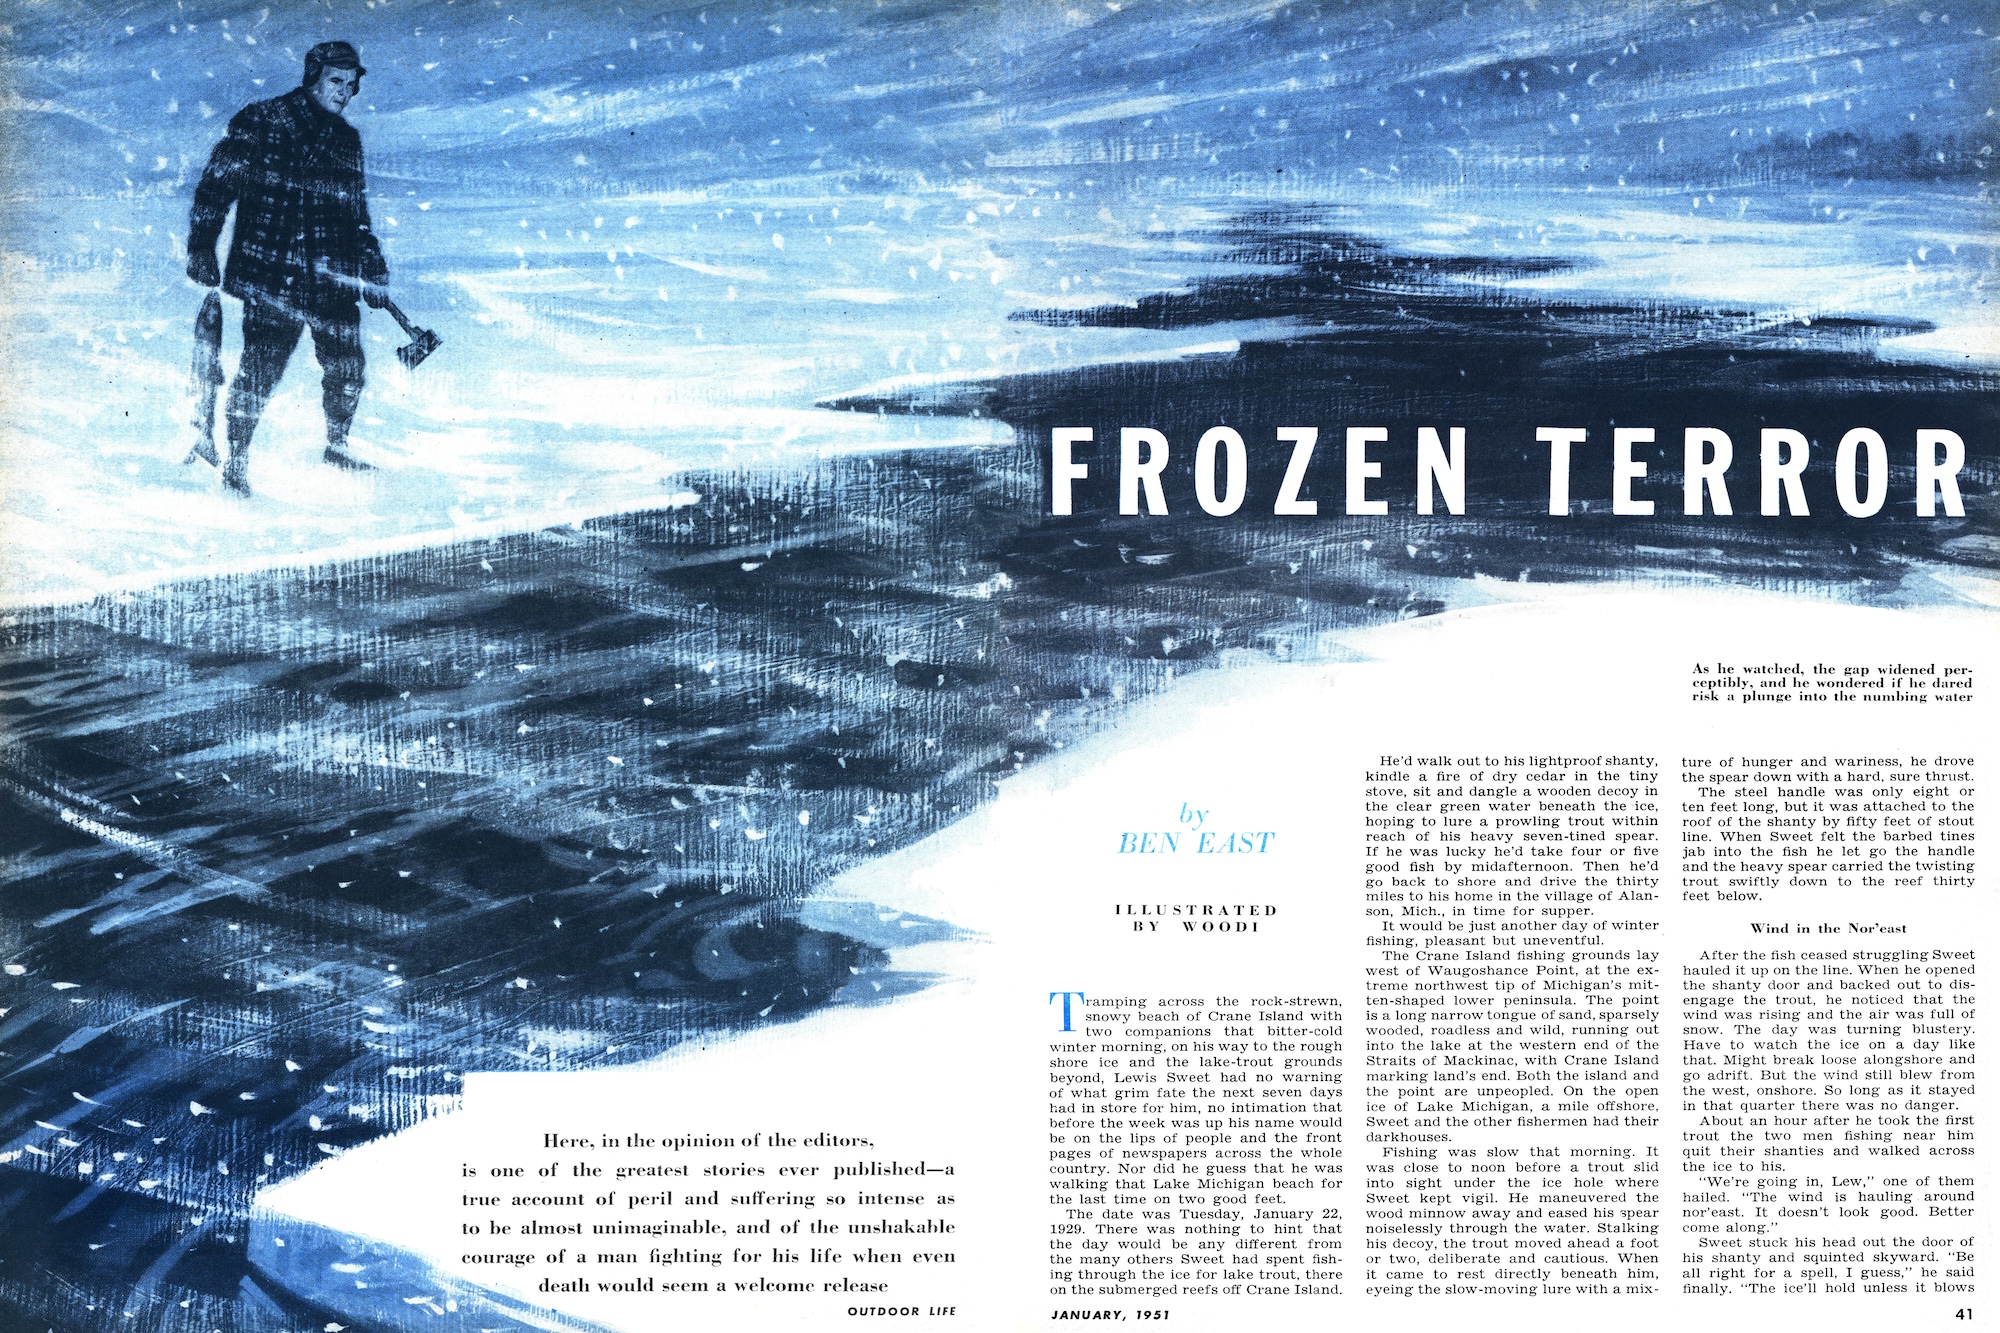 Frozen Terror, One of the Greatest Survival Stories of All Time